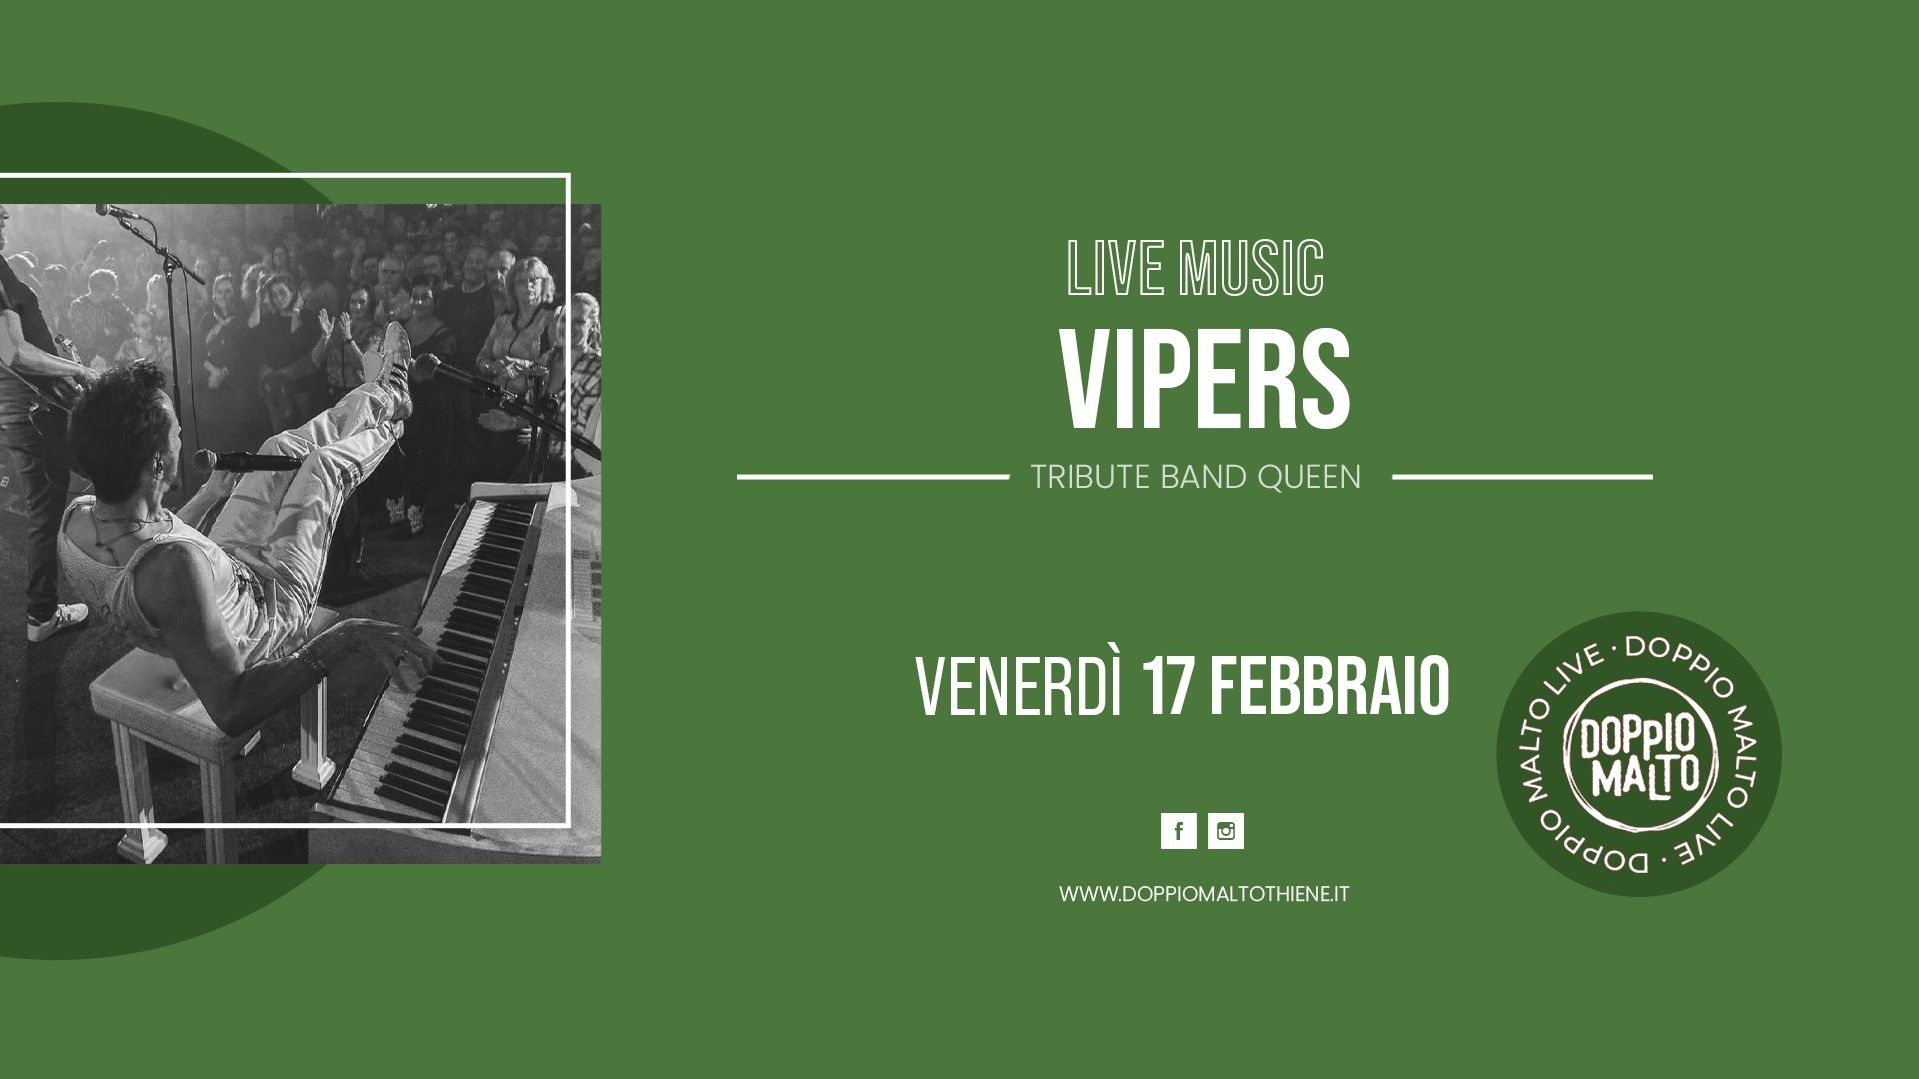 Vipers - Tribute band Queen